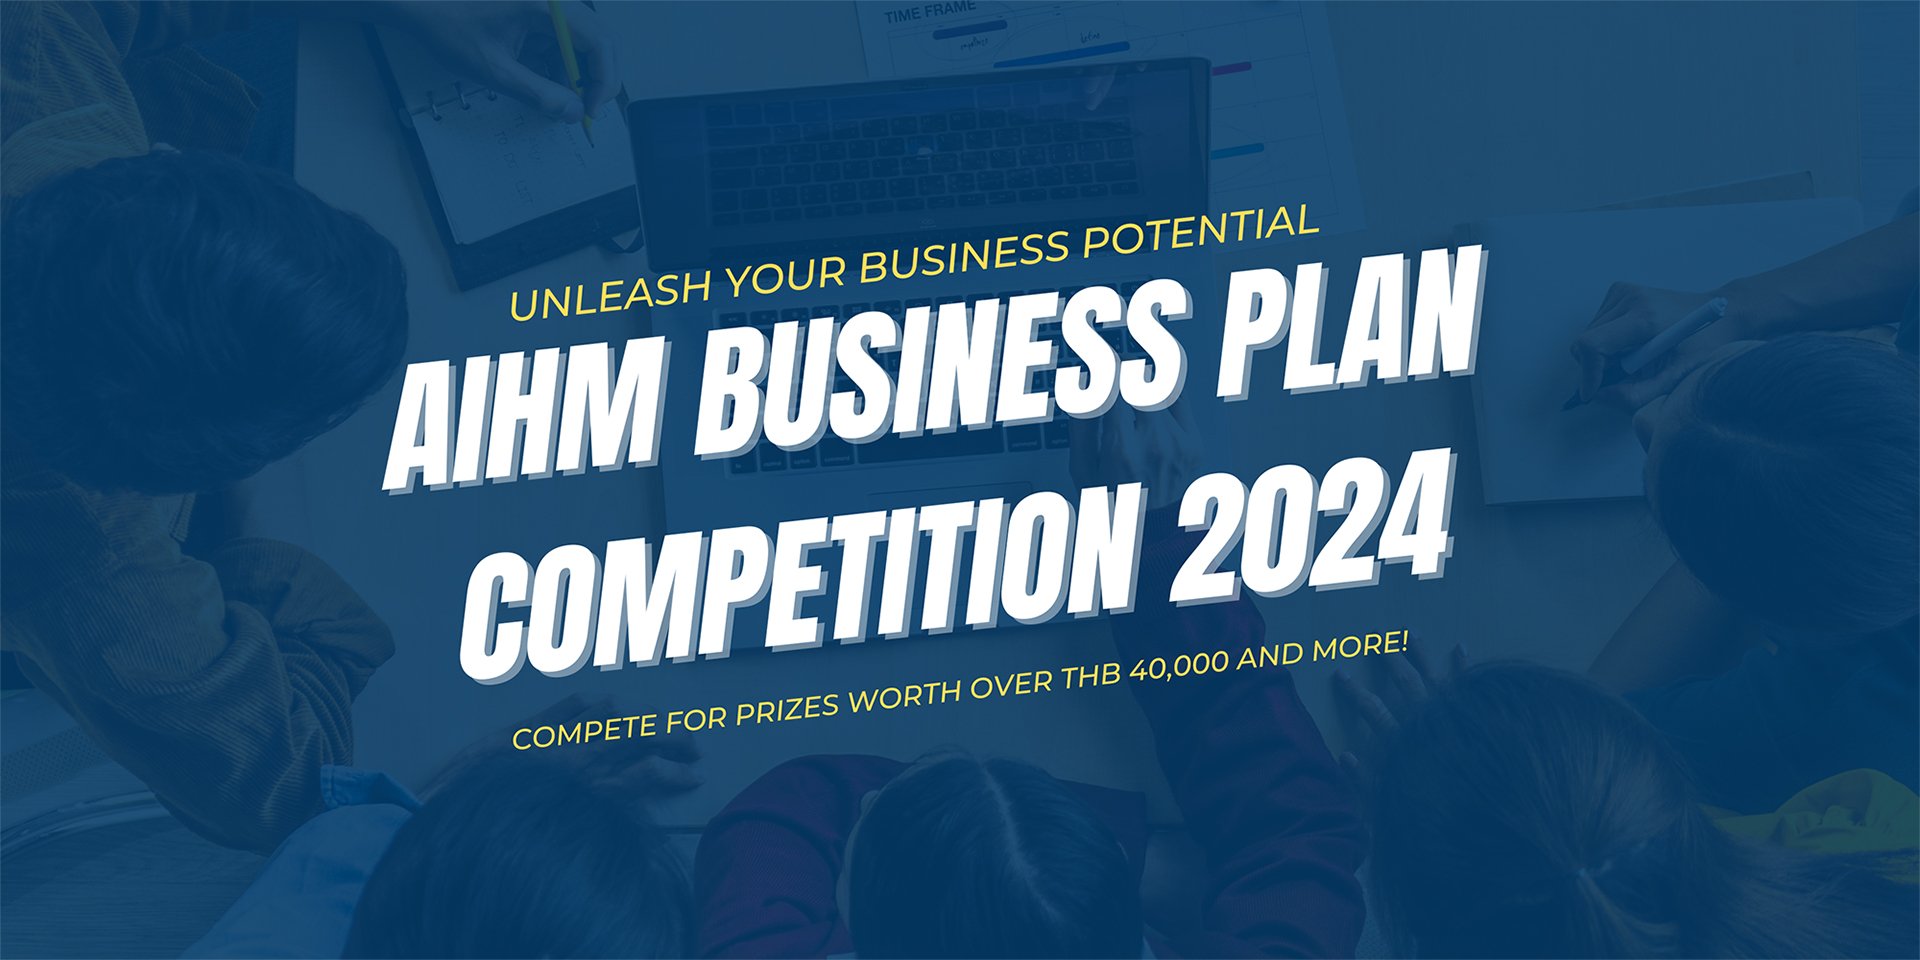 AIHM's Business Plan Competition 2024